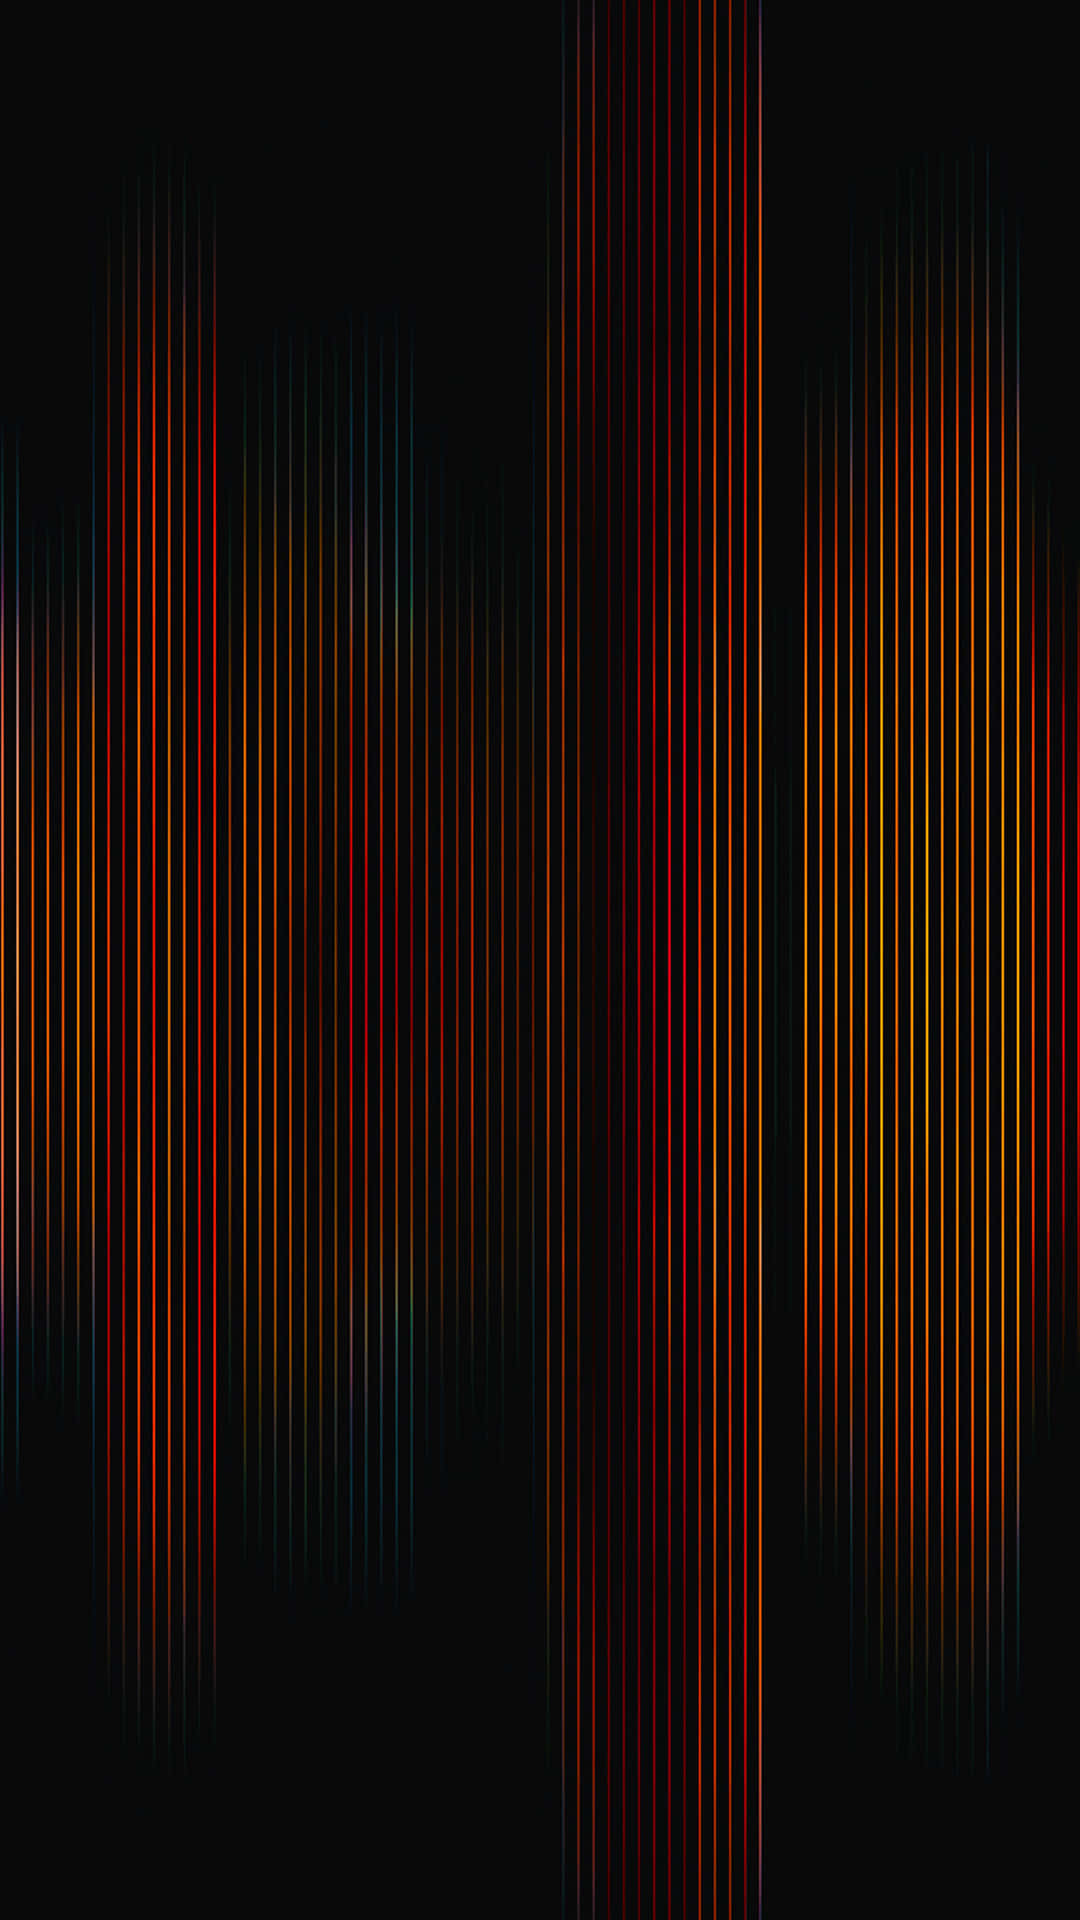 A Black Background With Colorful Lines Wallpaper